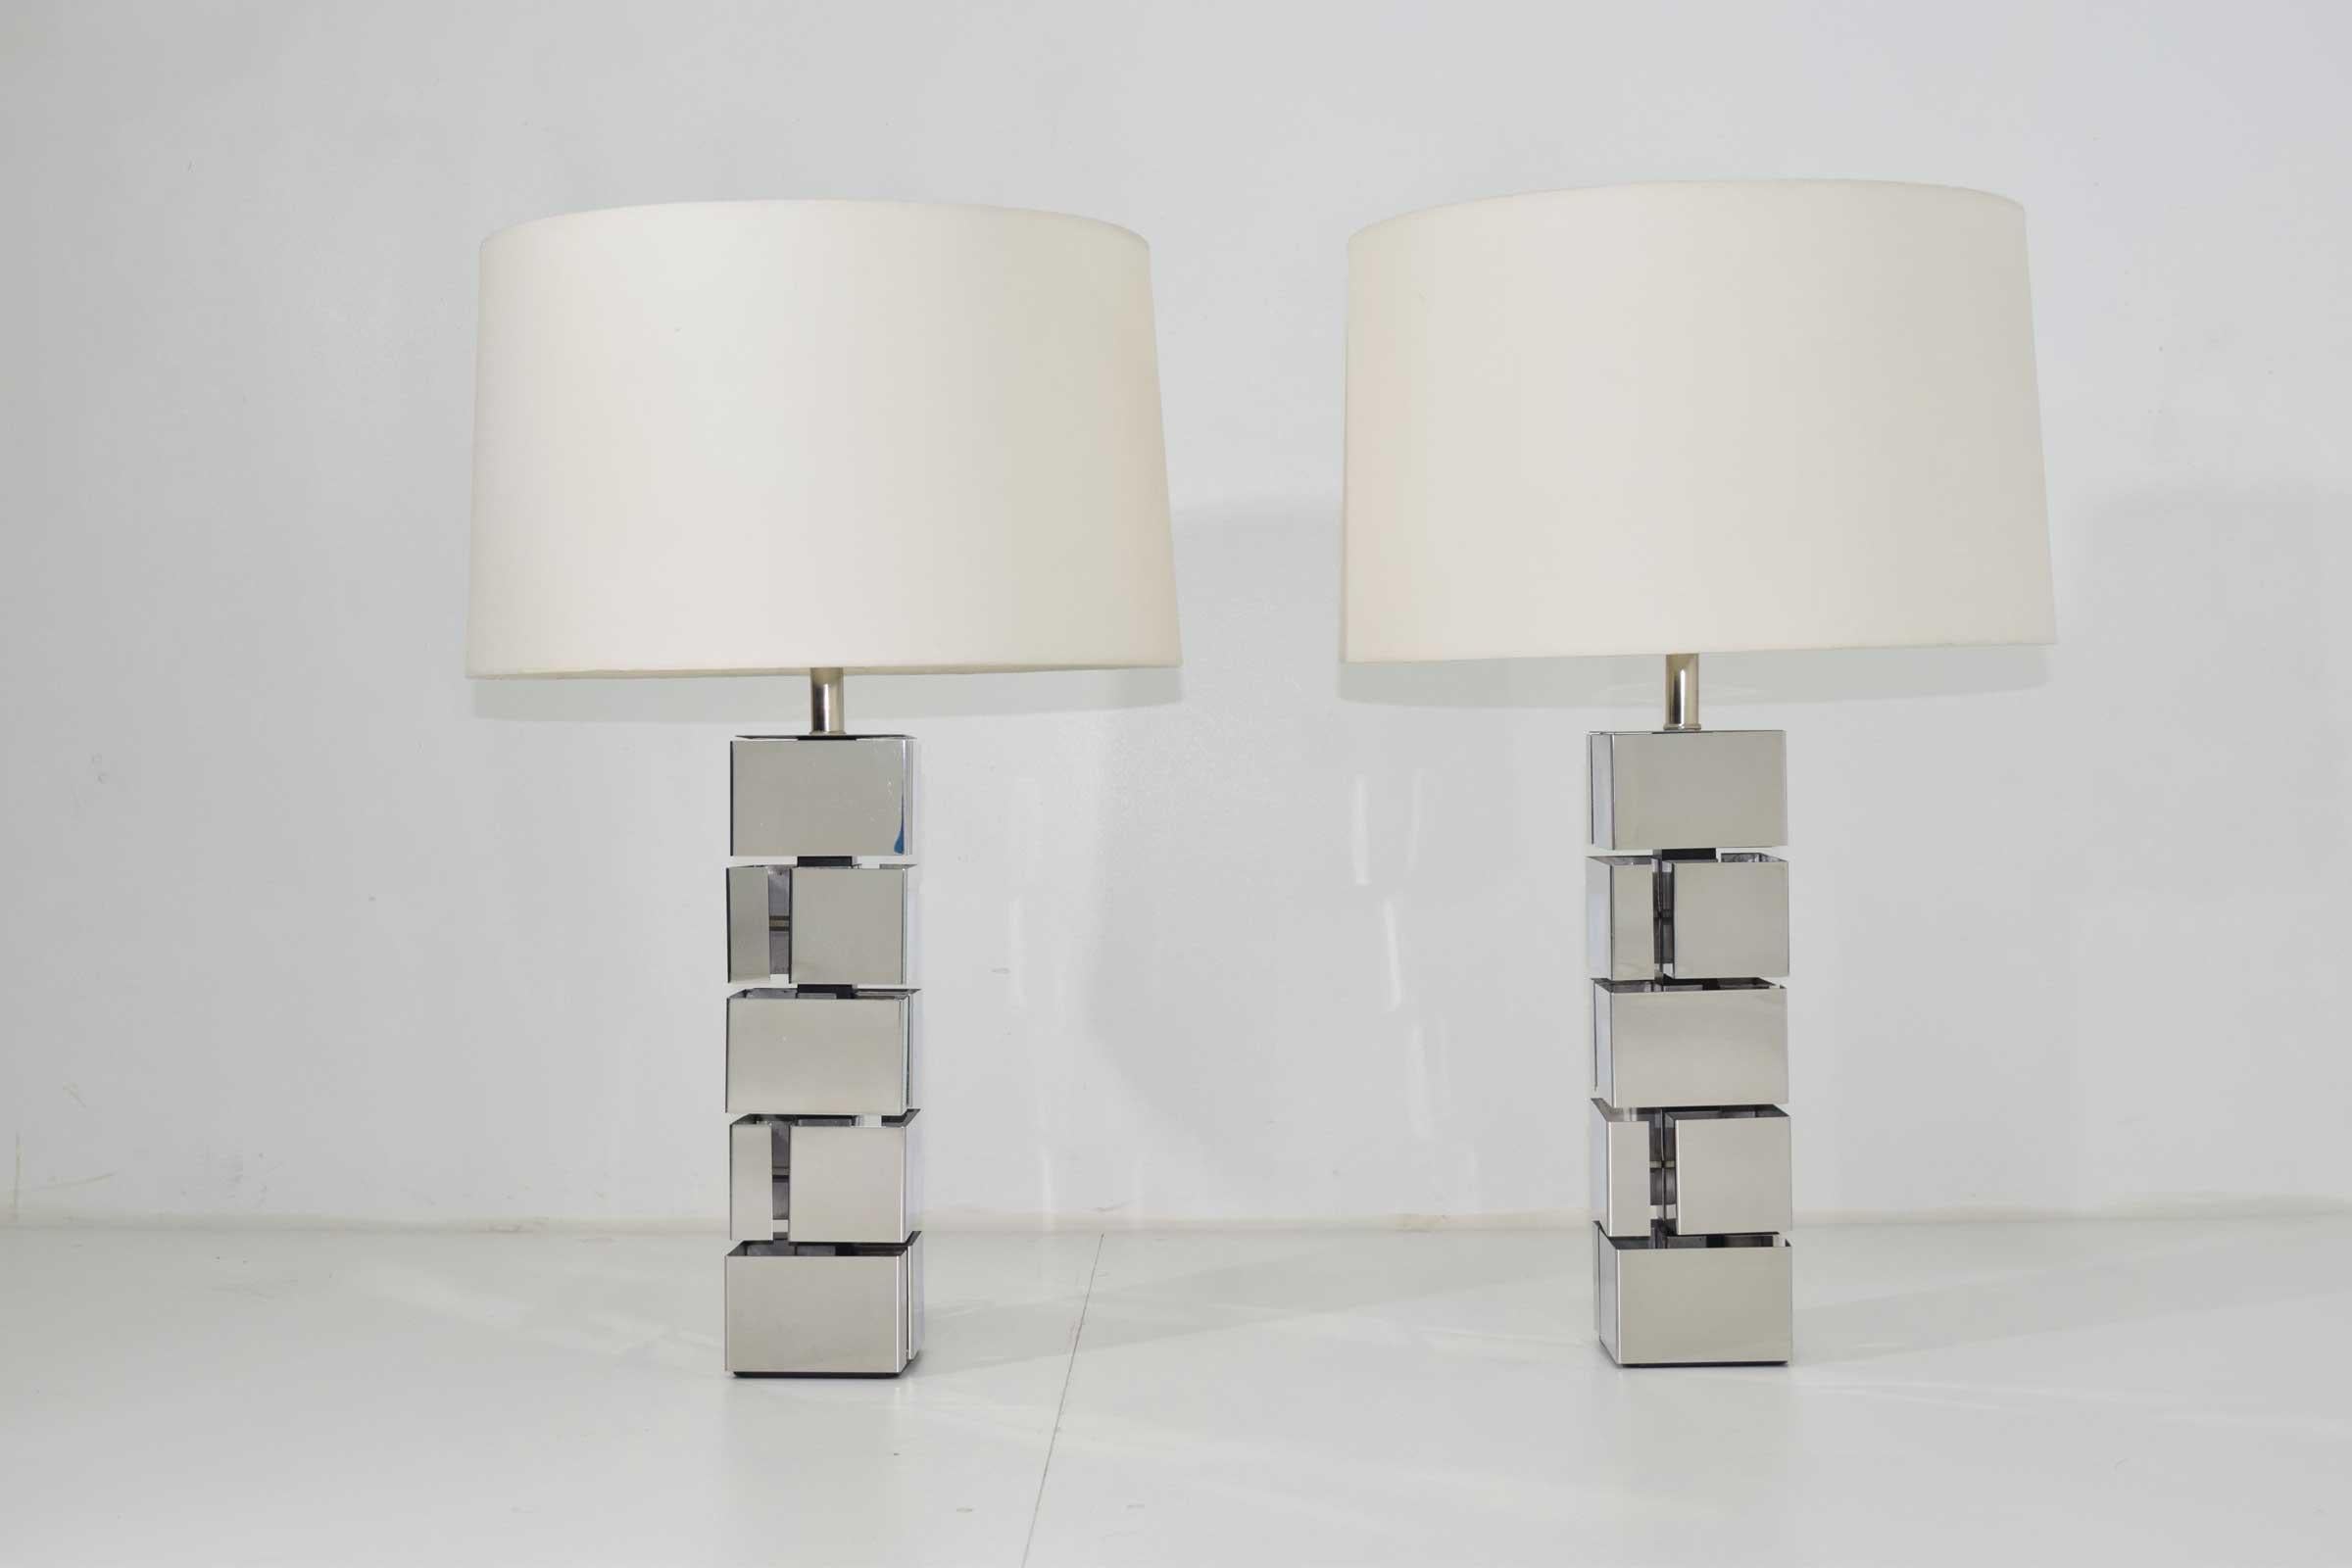 Great looking and in great condition. From great collectors who purchased in 1960s. Pair of polished chrome table lamps in style of Curtis Jere or Paul Evans. Shades not included. Measurements are too top of harp.